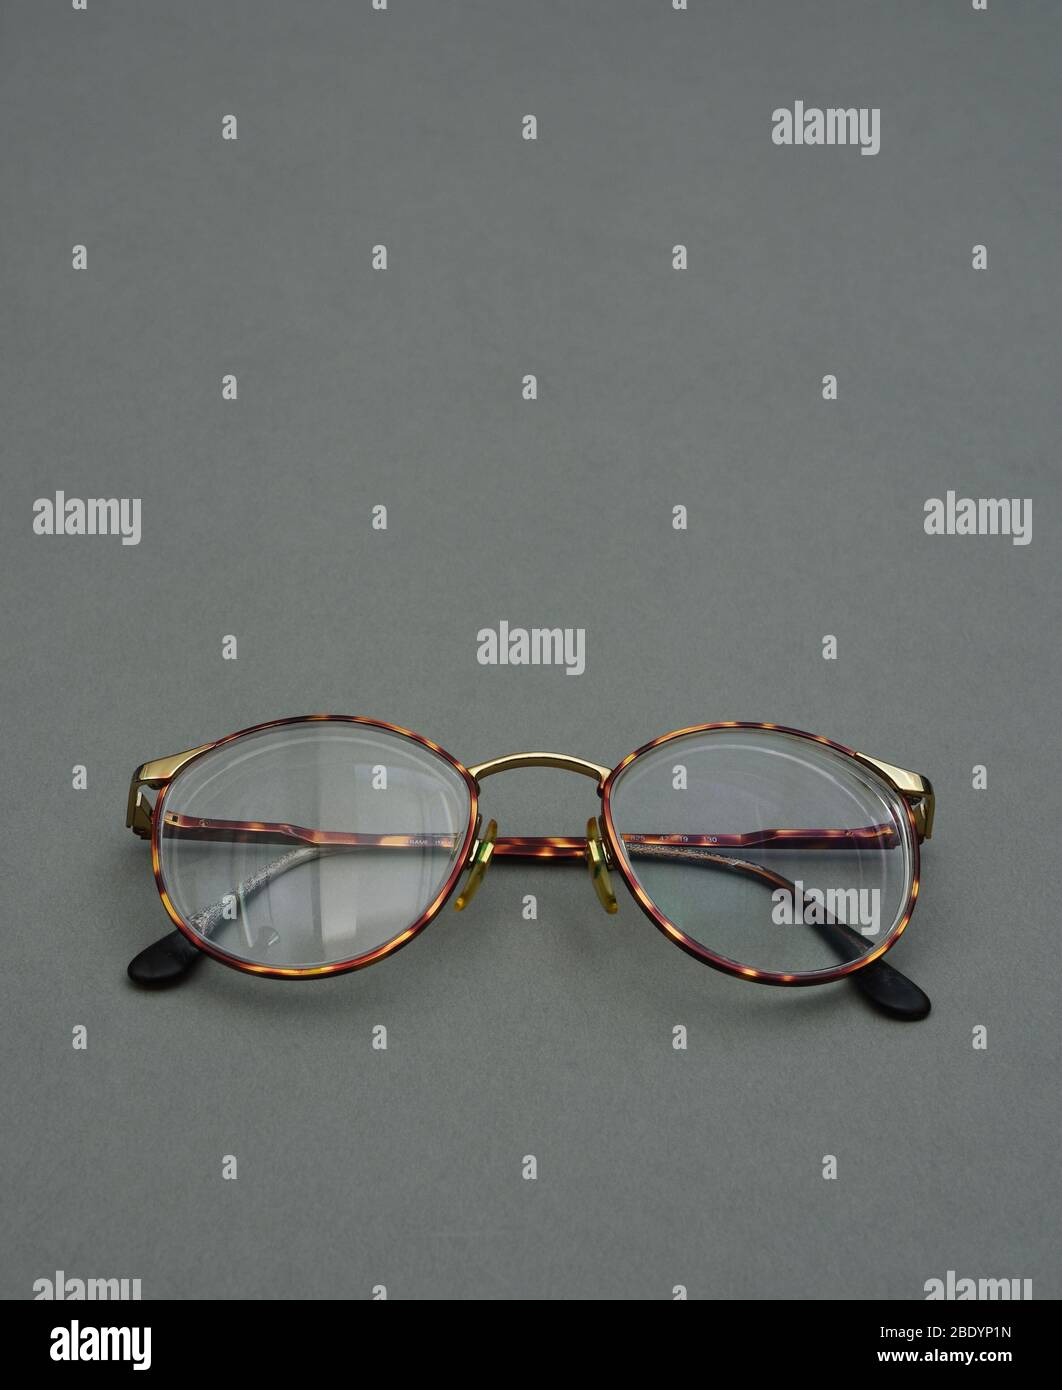 Glasses with reflective and non-reflective lenses Stock Photo